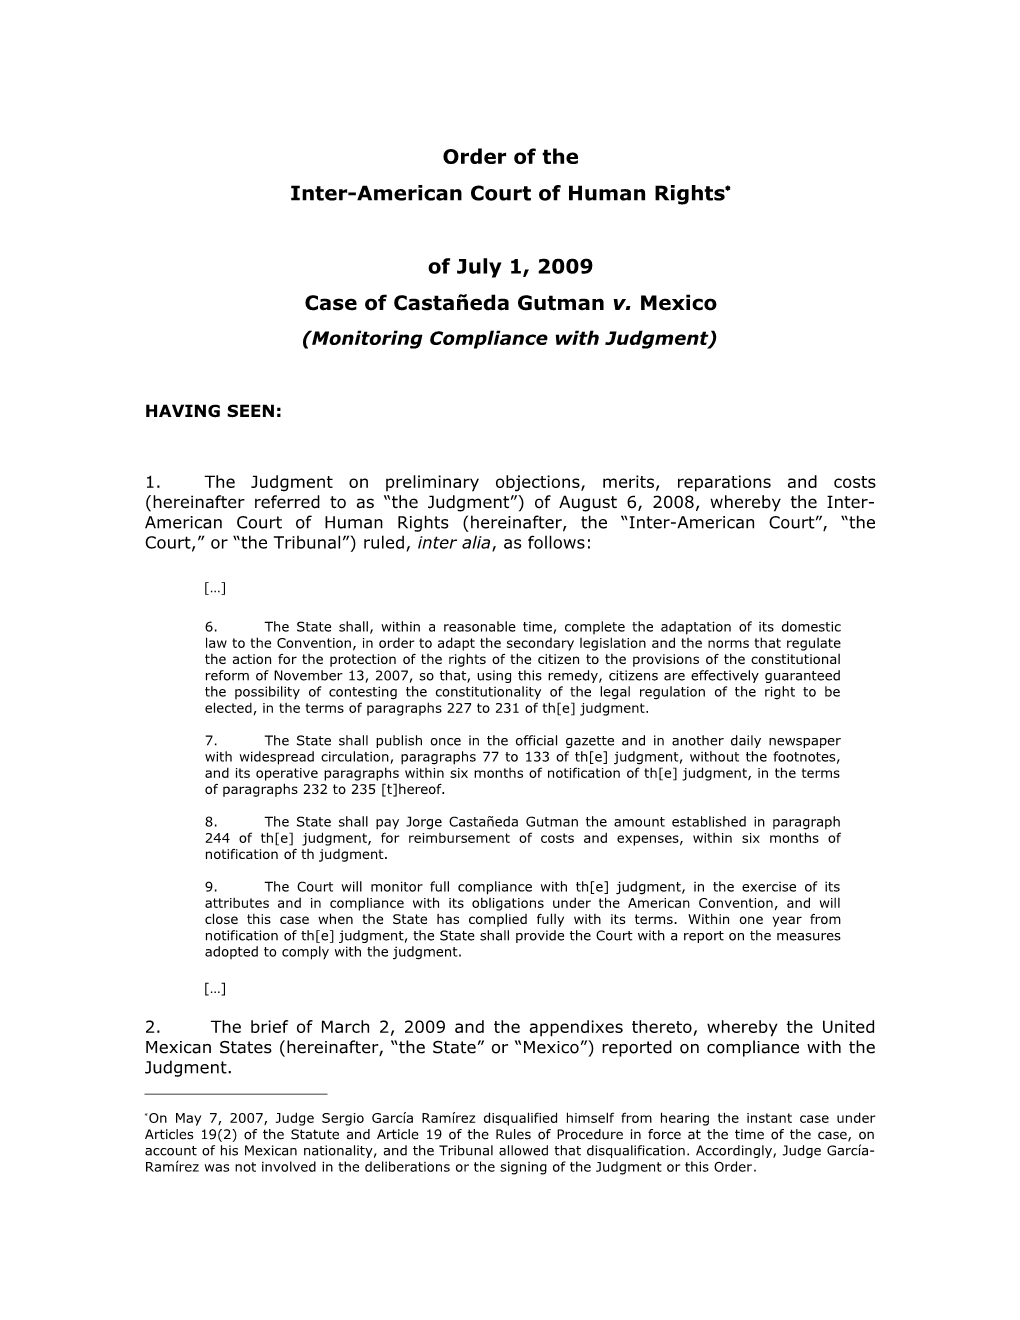 Inter-American Court of Human Rights ( s22